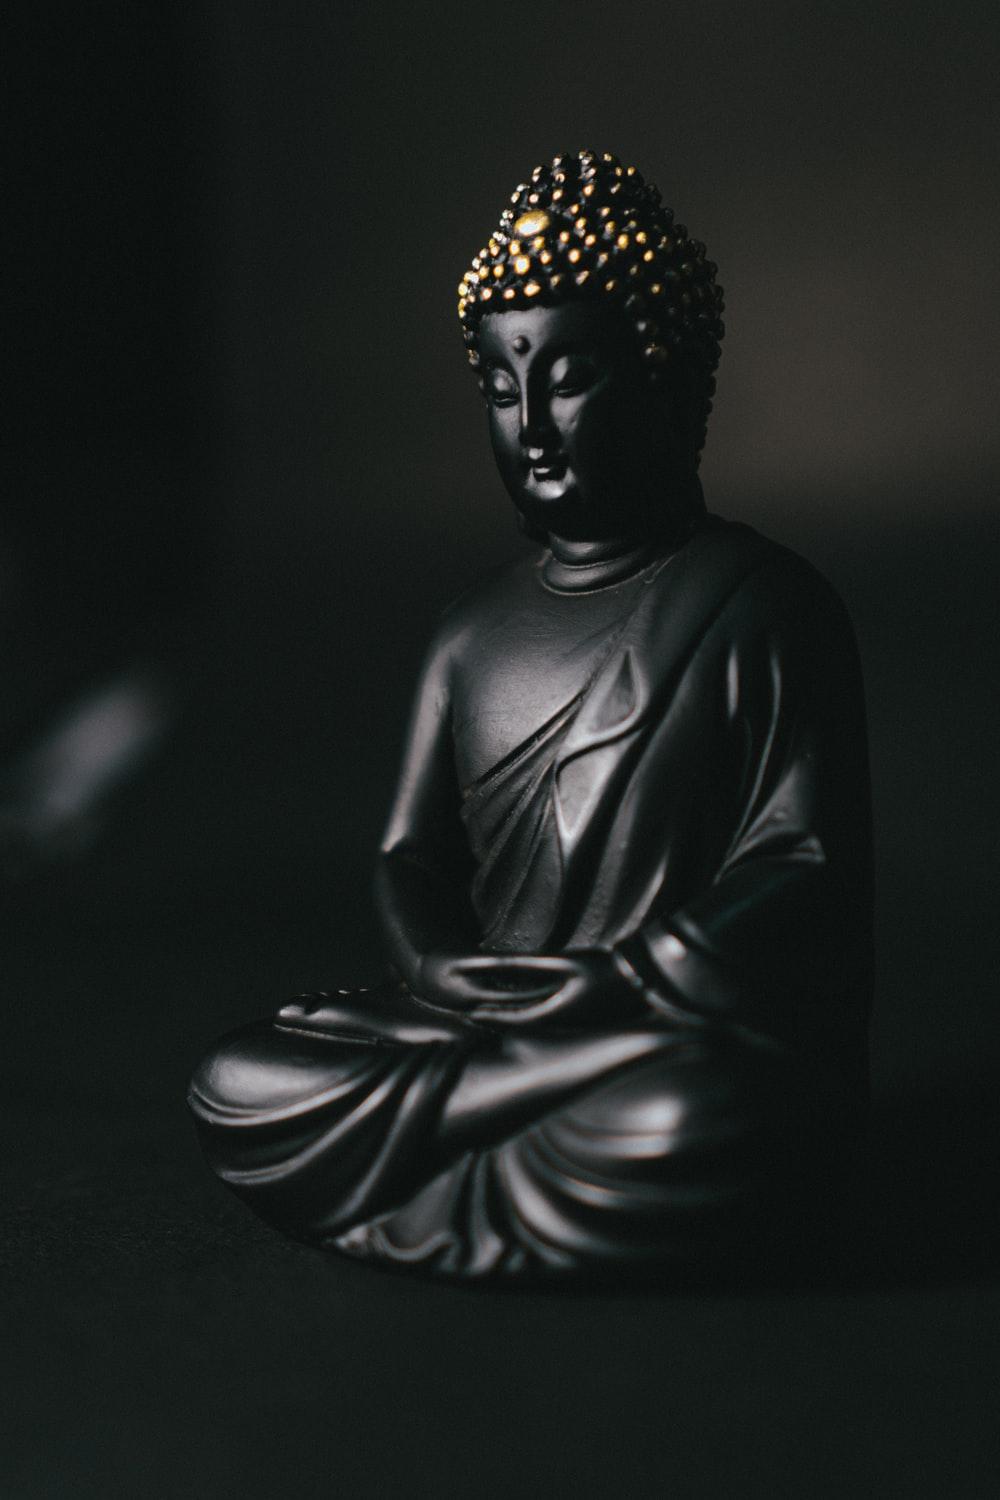 Buddha Black Wallpaper with Love for Dark and Pleasant Moods Stock Image   Image of black buddha 161853787